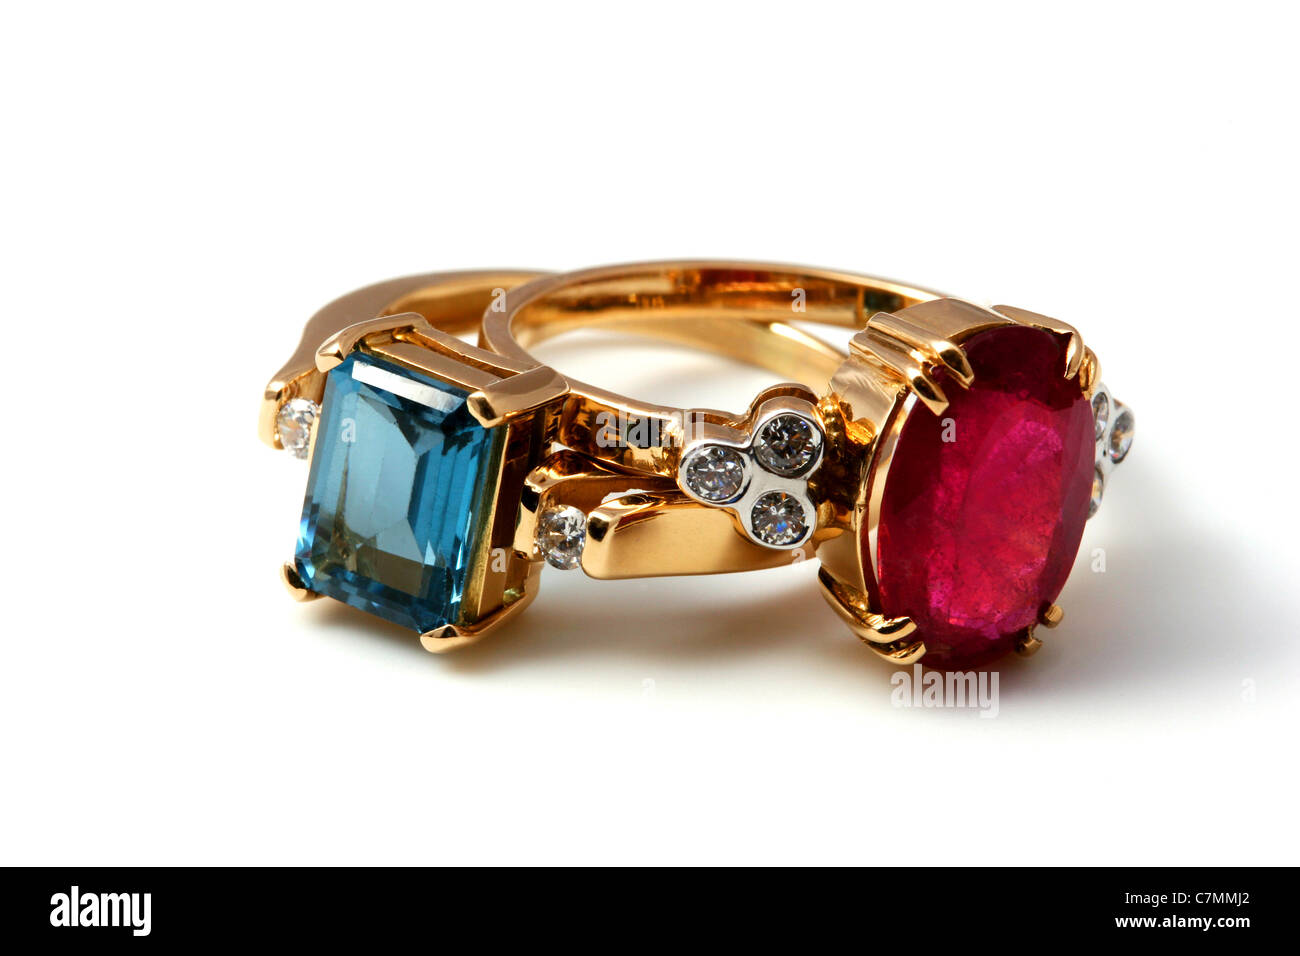 Colored topaz ring made of gold. Stock Photo